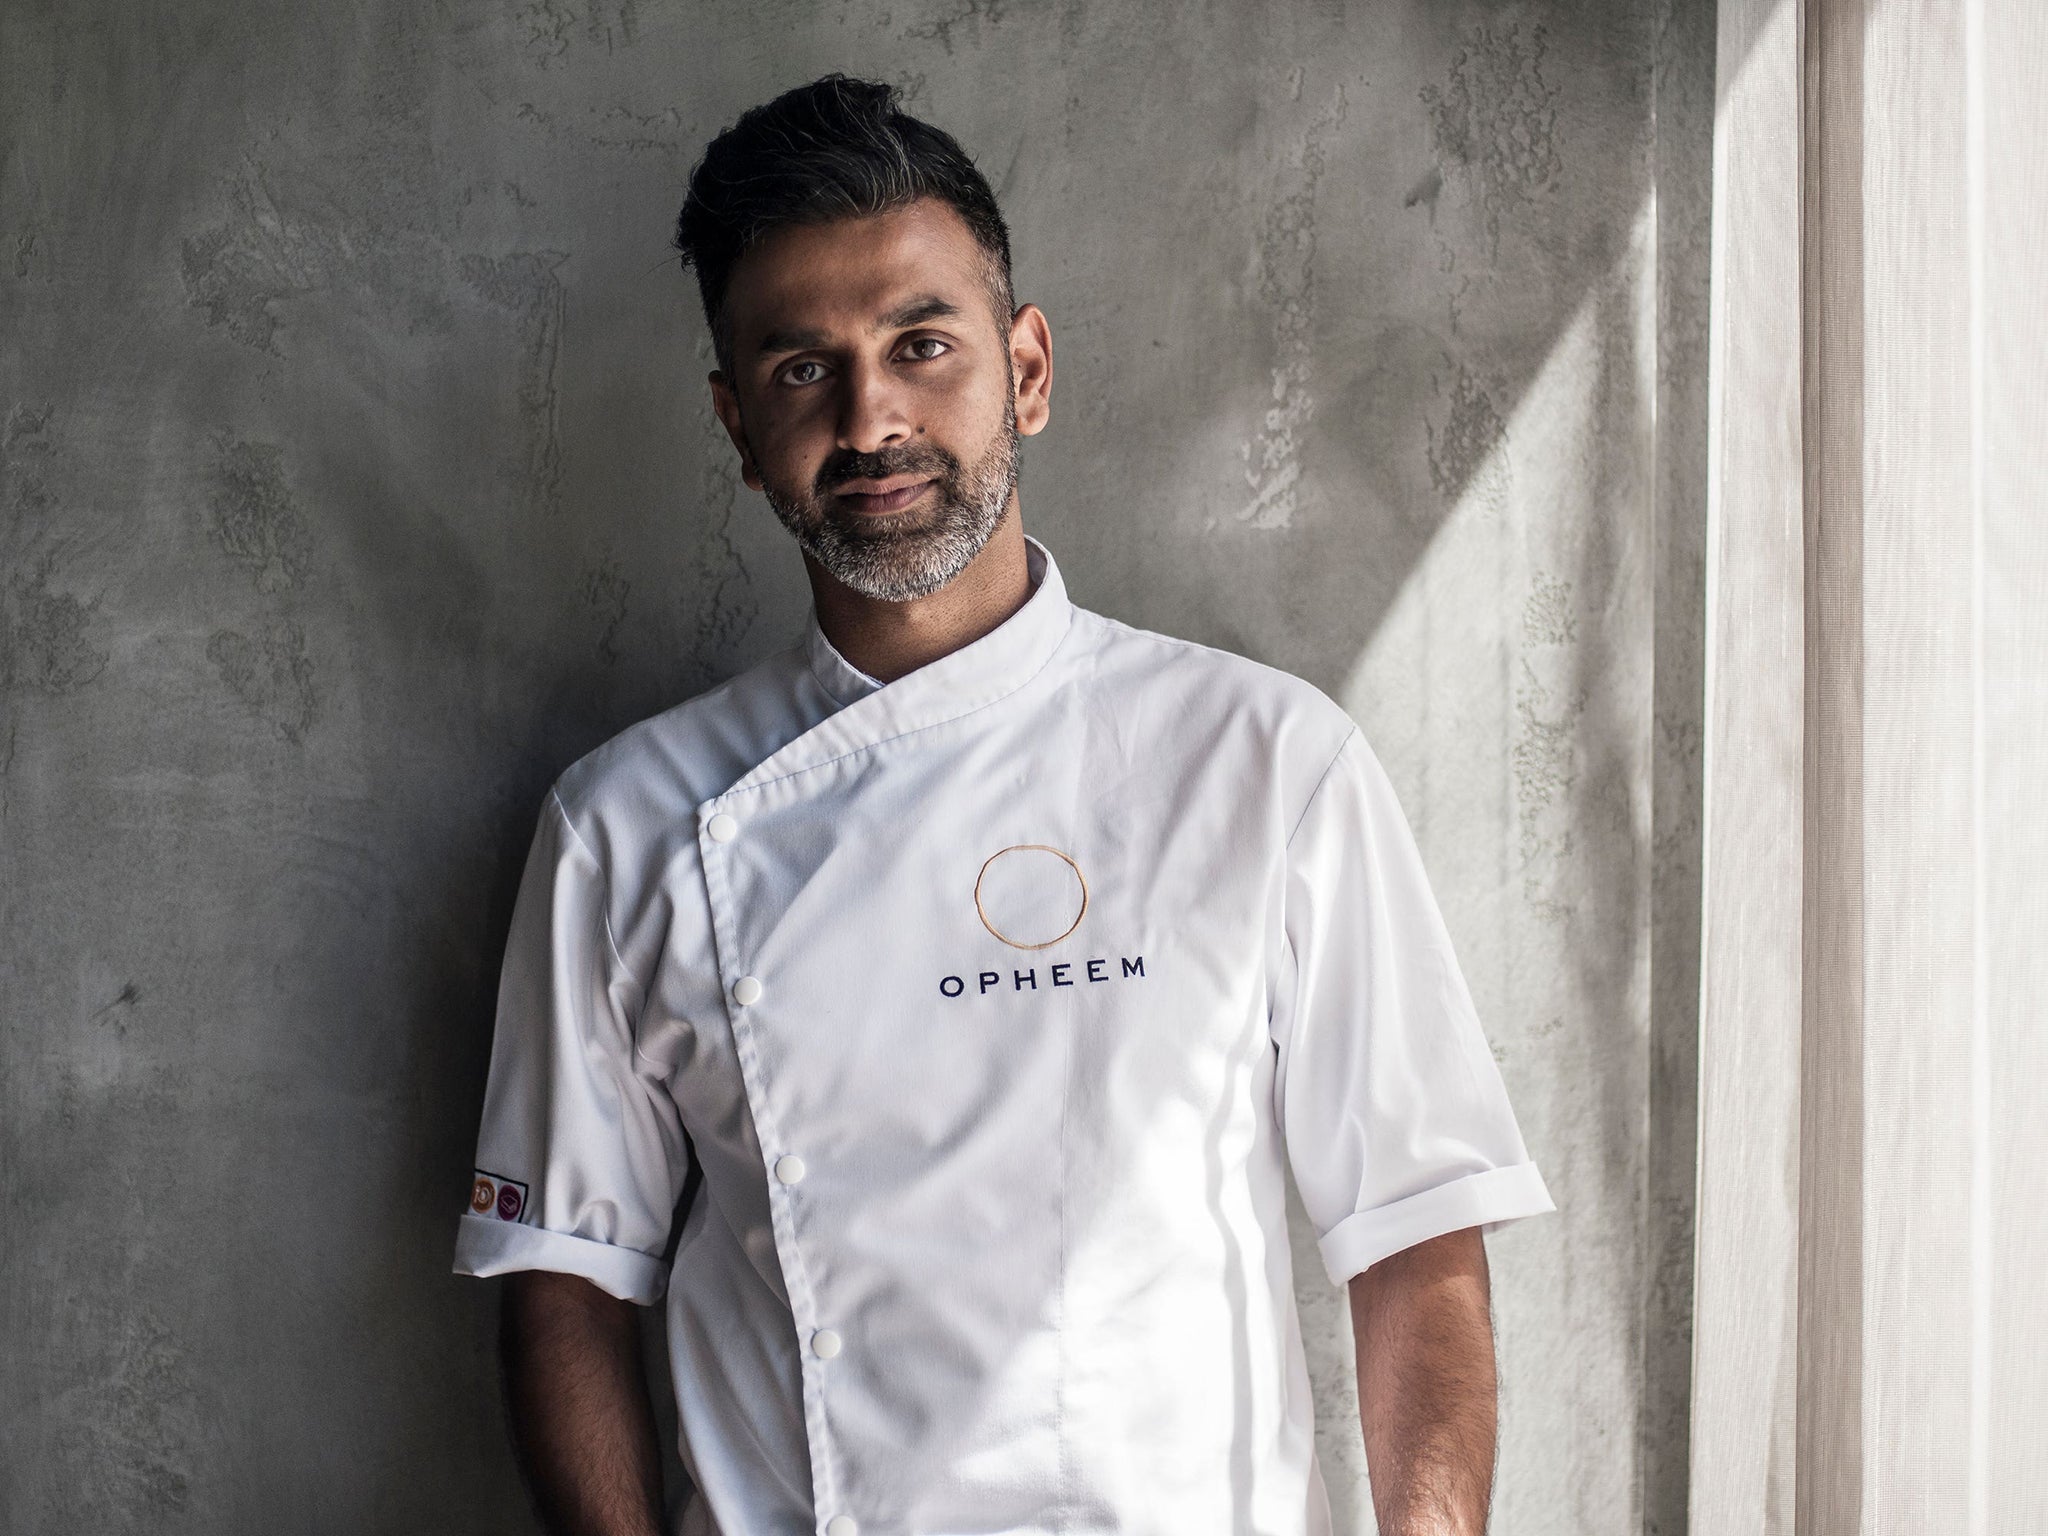 Islam’s Opheem restaurant is the first non-London-based Indian restaurant in England to receive a Michelin star